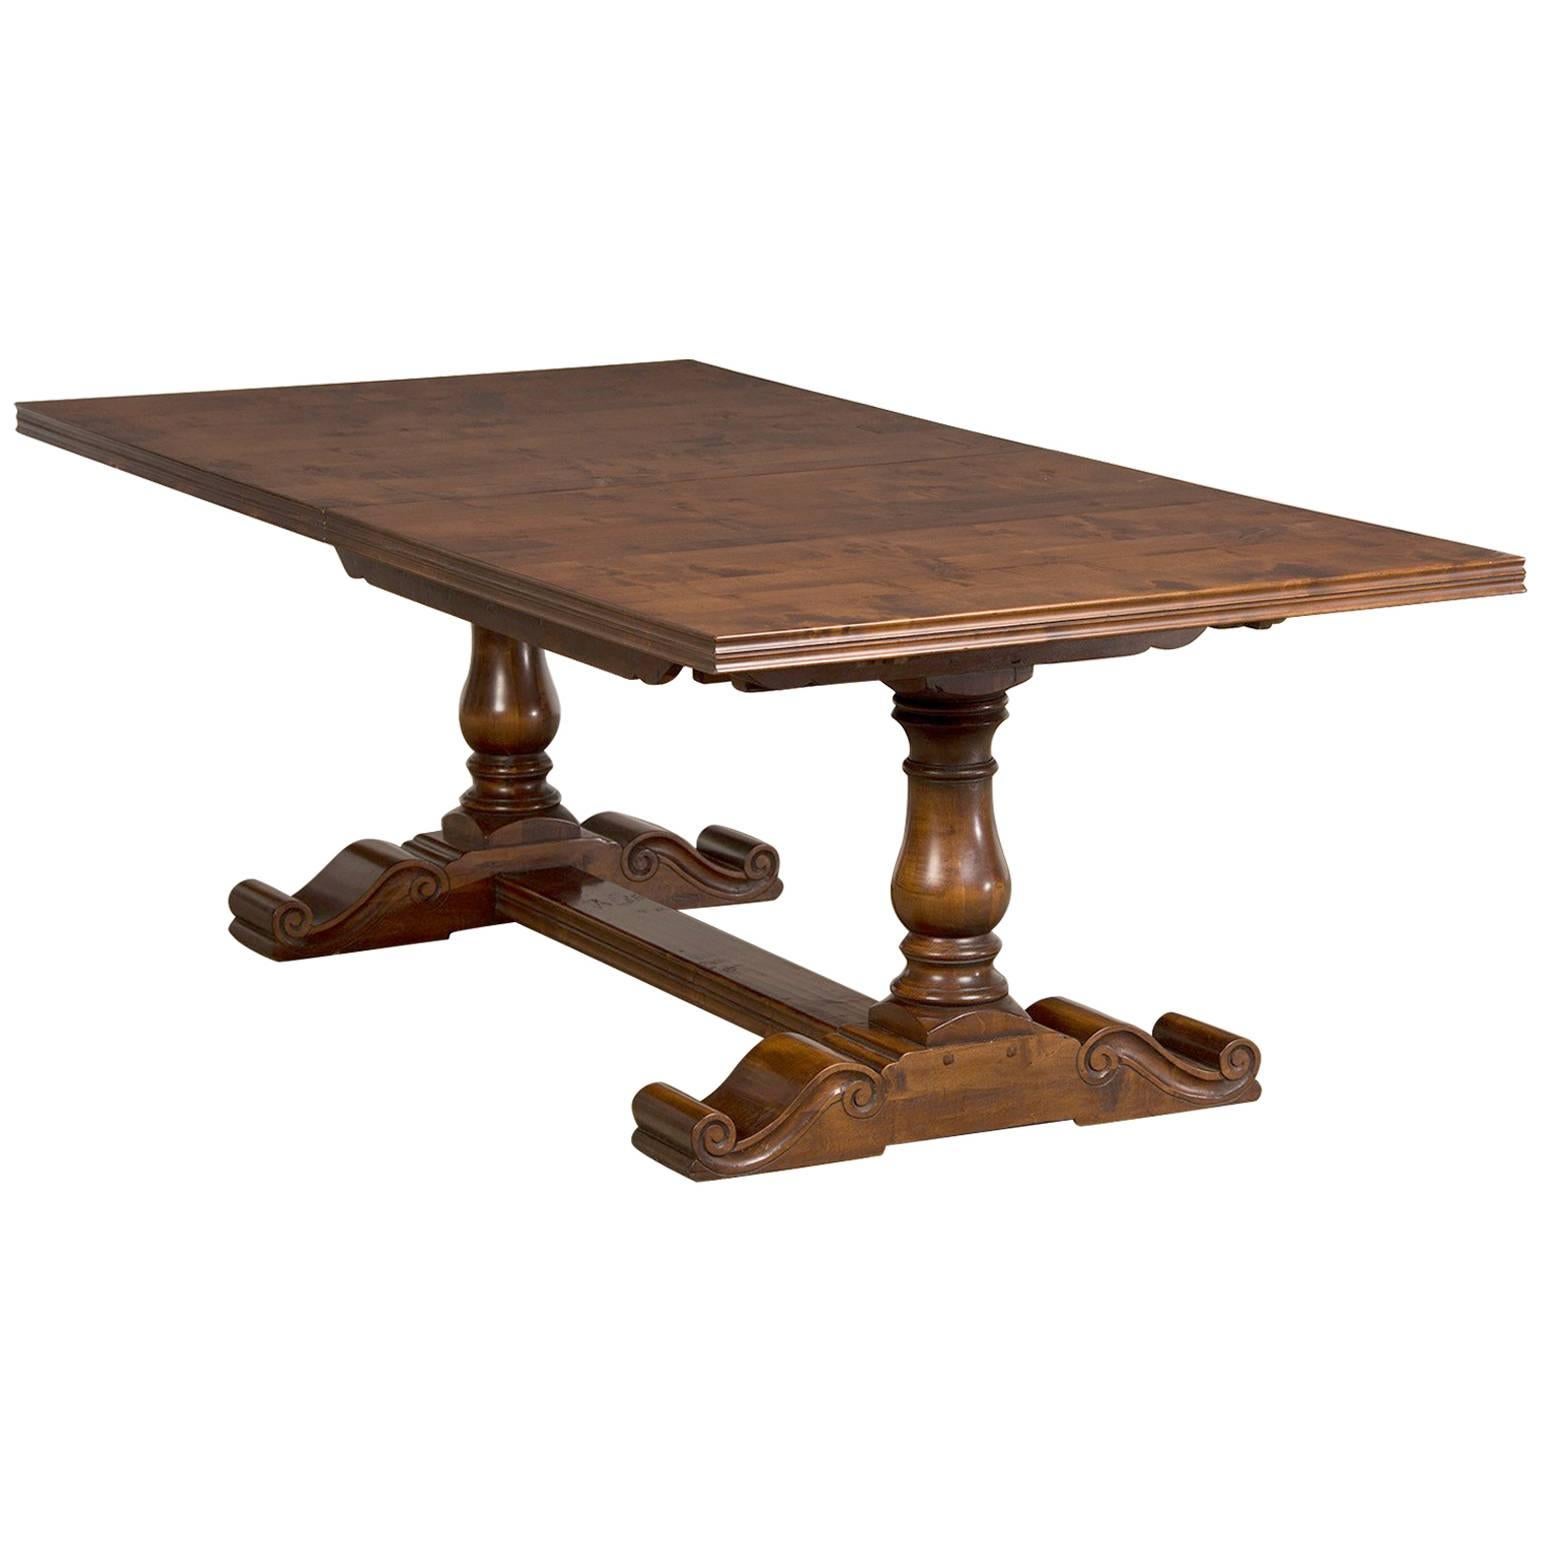 English Hand-Planed, Waxed Cherrywood Trestle Dining Table with Three Leaves